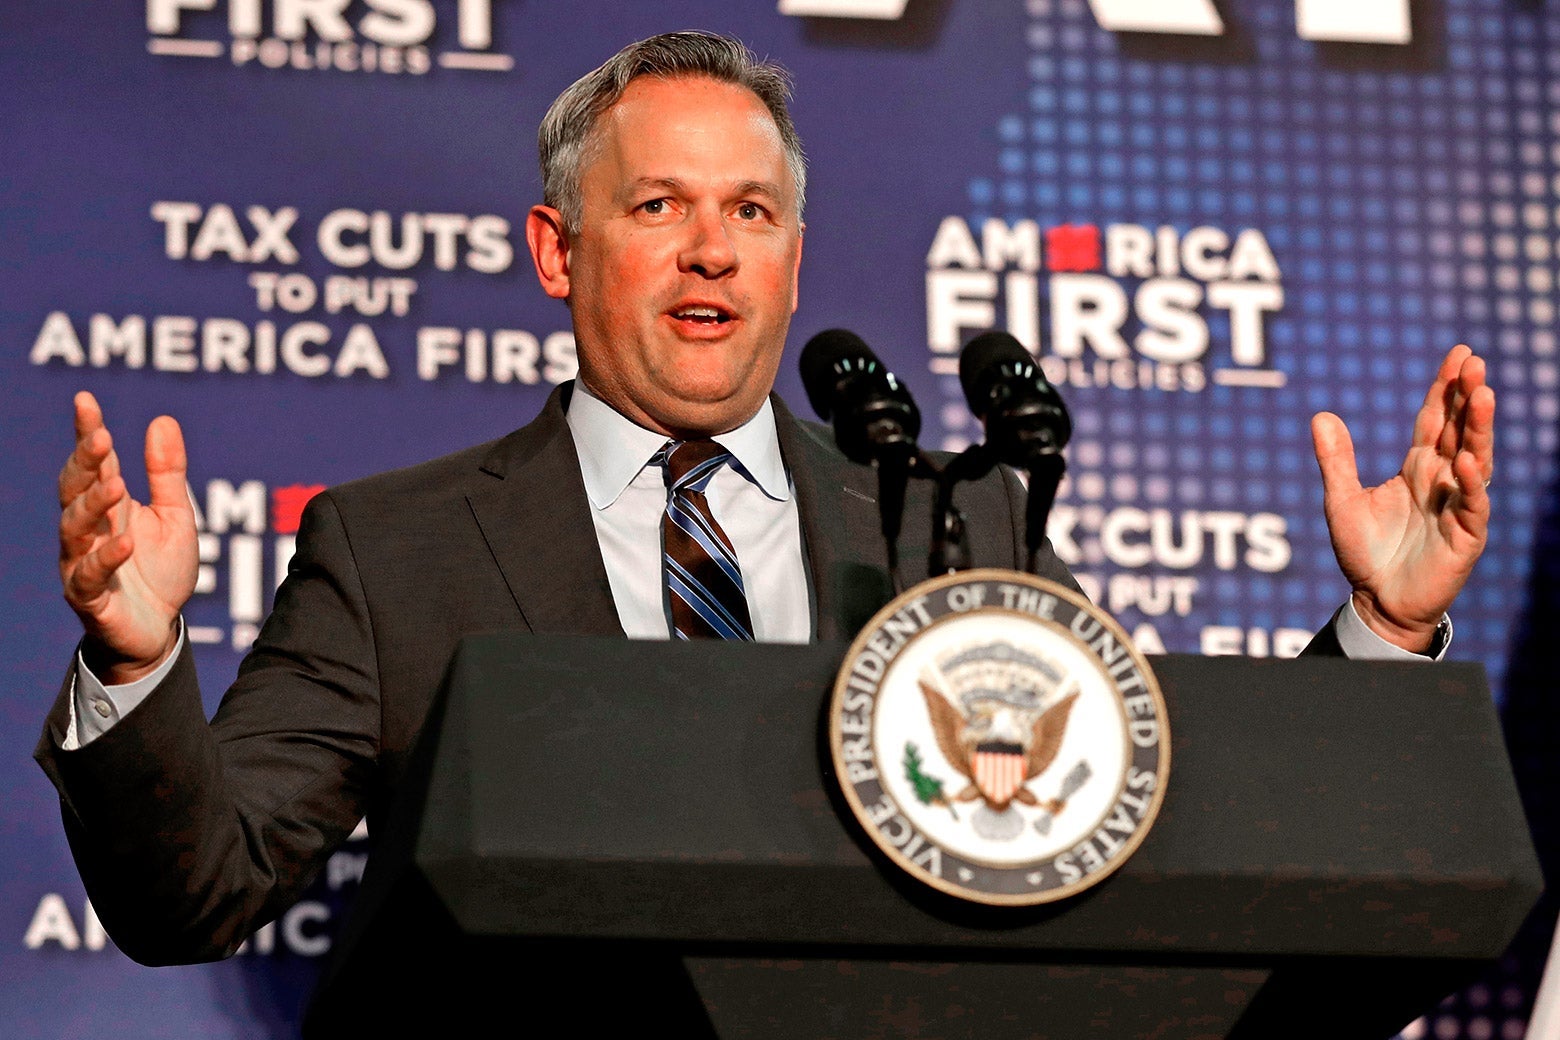 Forest raises his arms while speaking at a podium, with America First signage behind him.